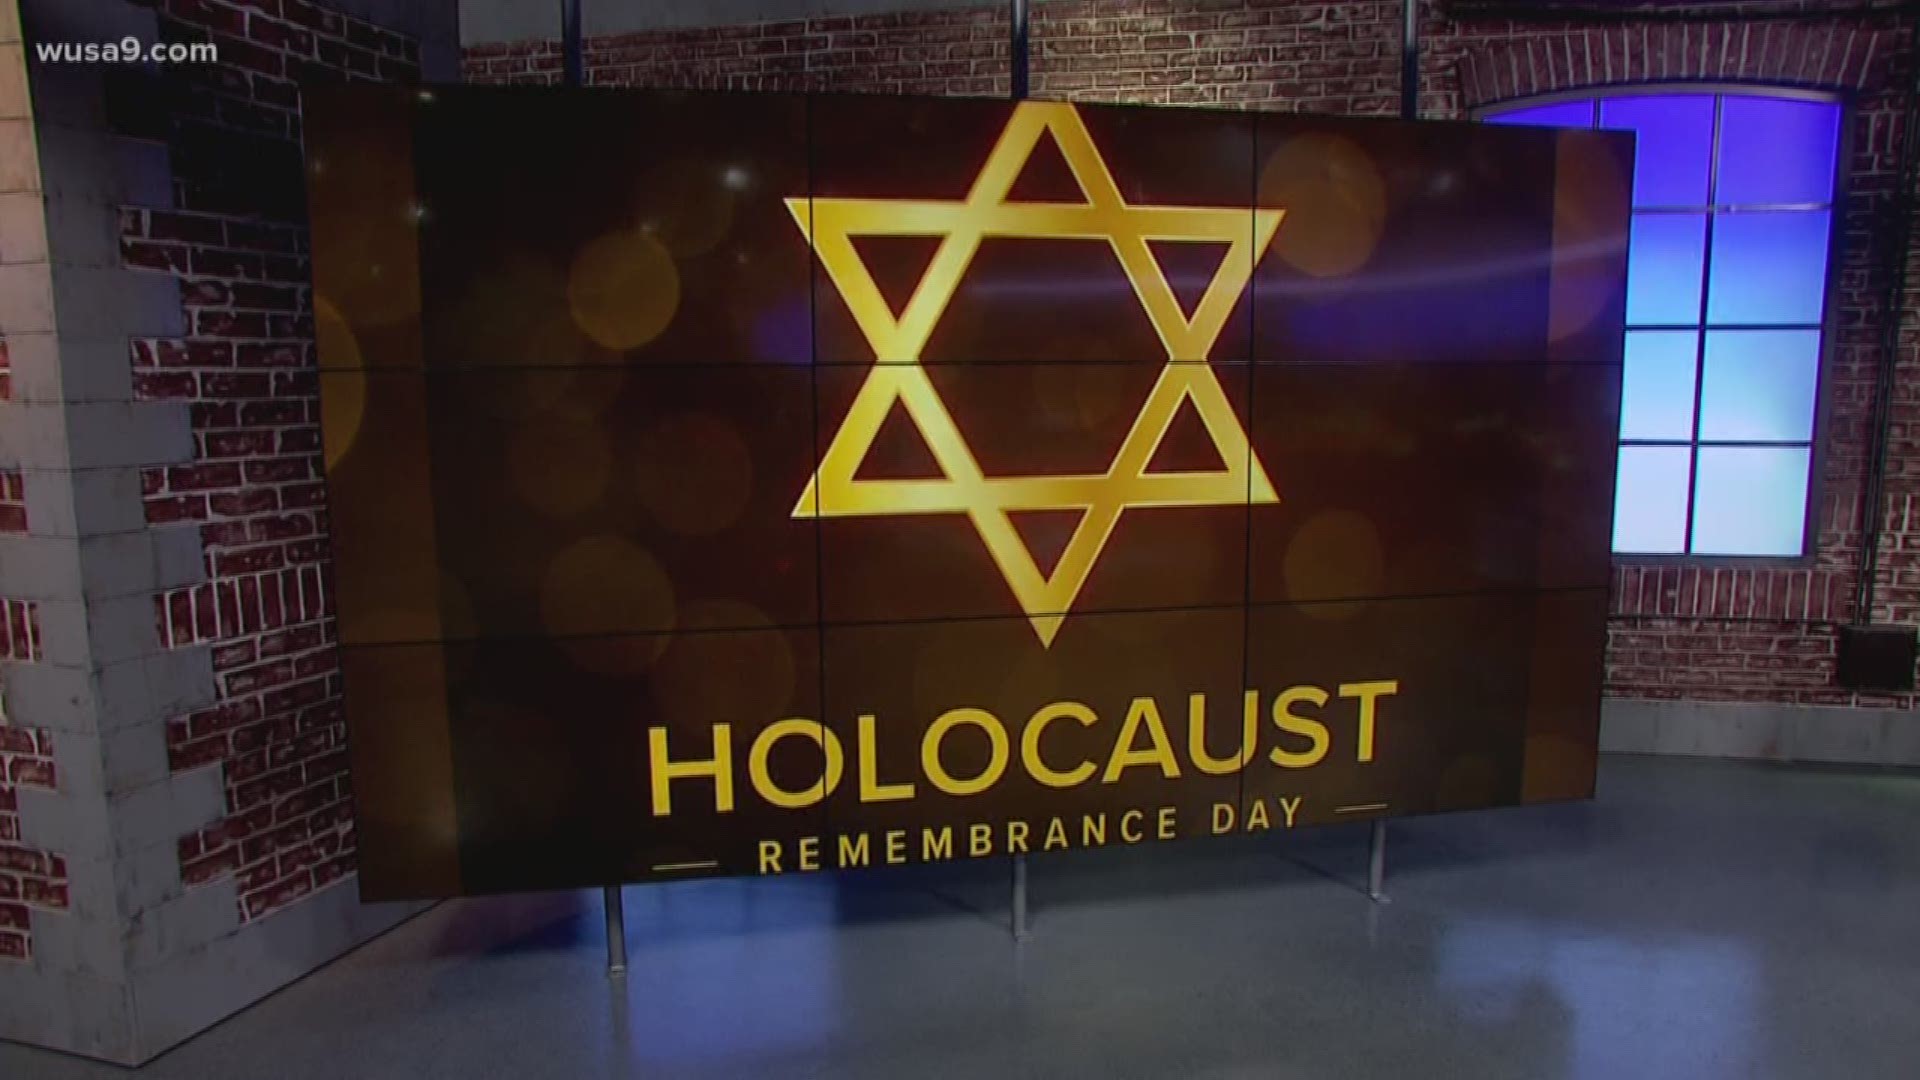 In observance of International Holocaust Remembrance day, the U-S Holocaust Memorial Museum here in Washington held a special ceremony today.